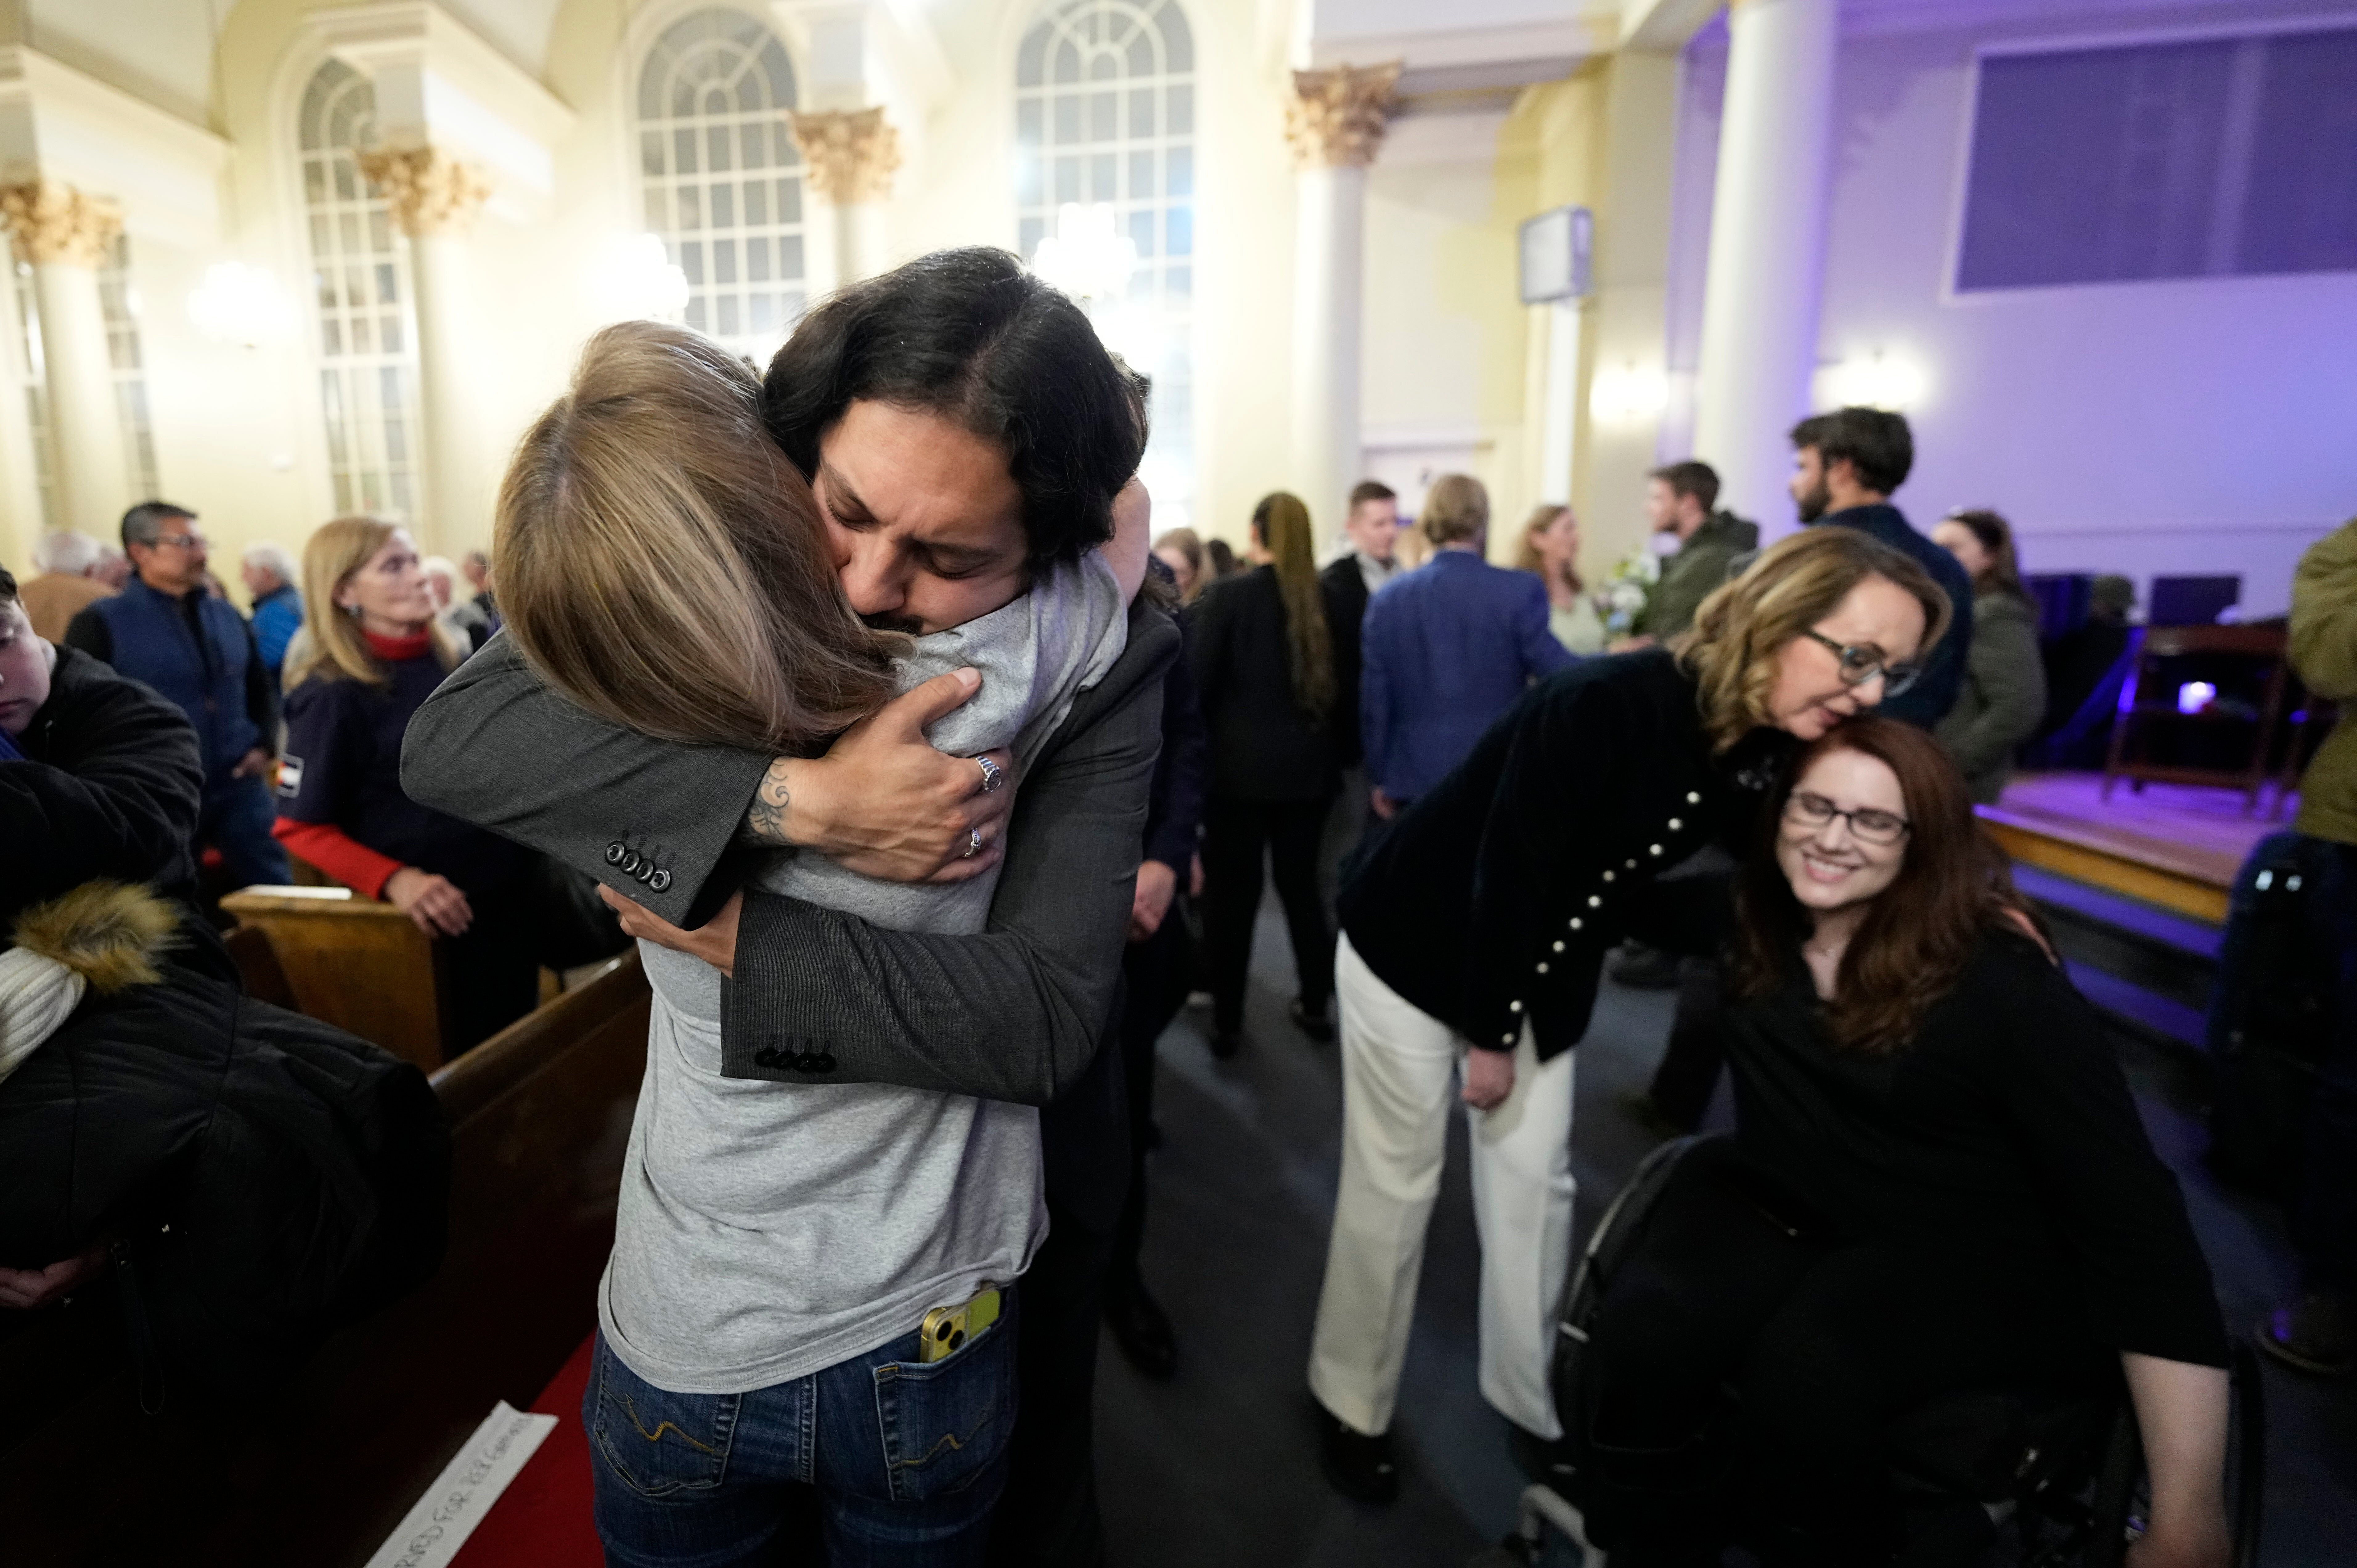 Tim Hernandez hugs Kallie Leyba as former Arizona Rep. Gabby Giffords, second from right, hugs Anne Marie Hochhalter, right during a vigil remembering the 25th anniversary of the Columbine High School mass